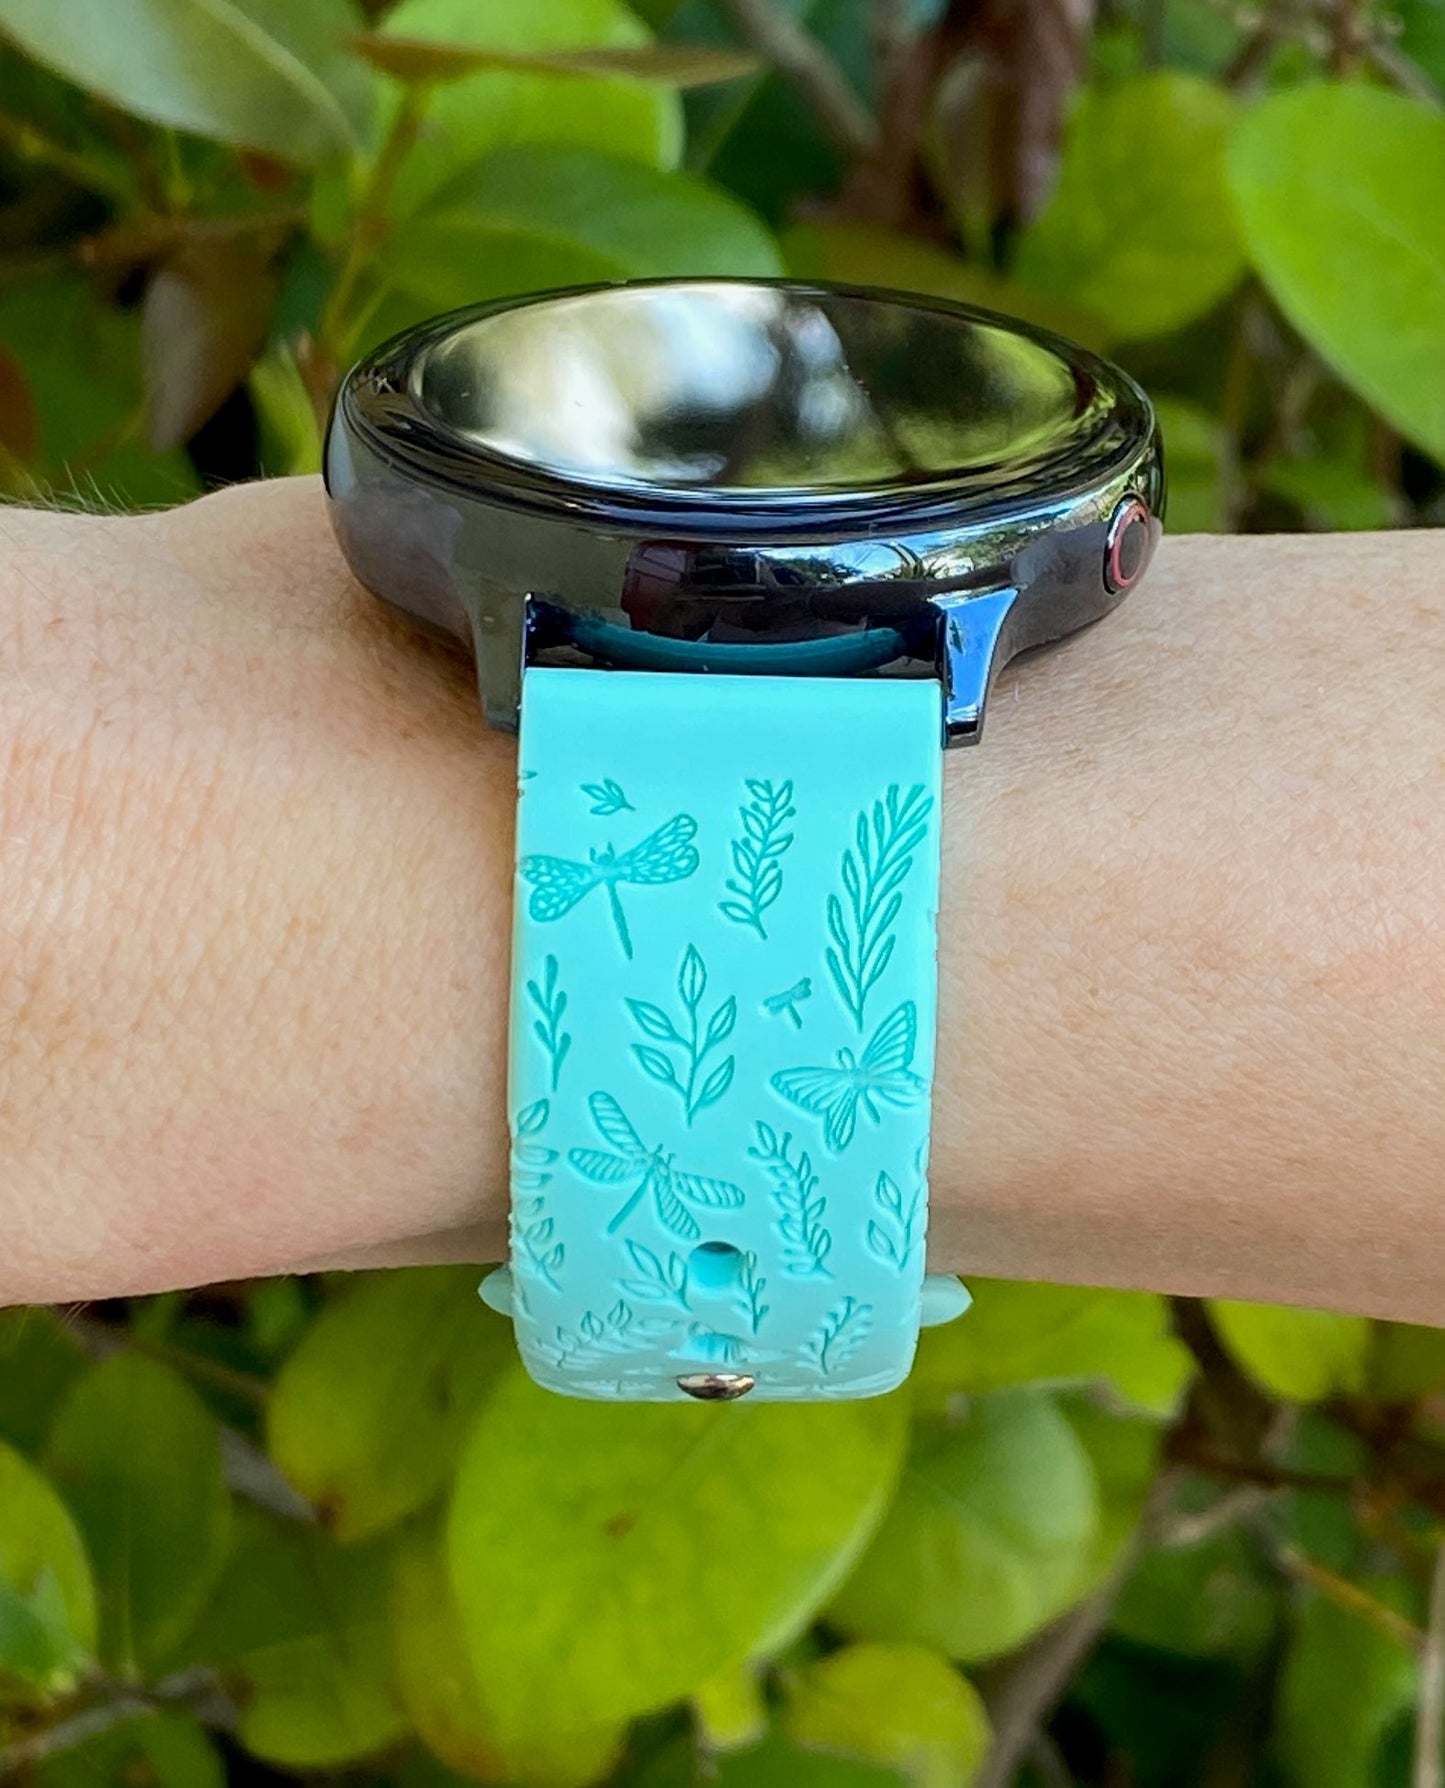 Dragonfly and Butterflies 20mm Samsung Galaxy Watch Band